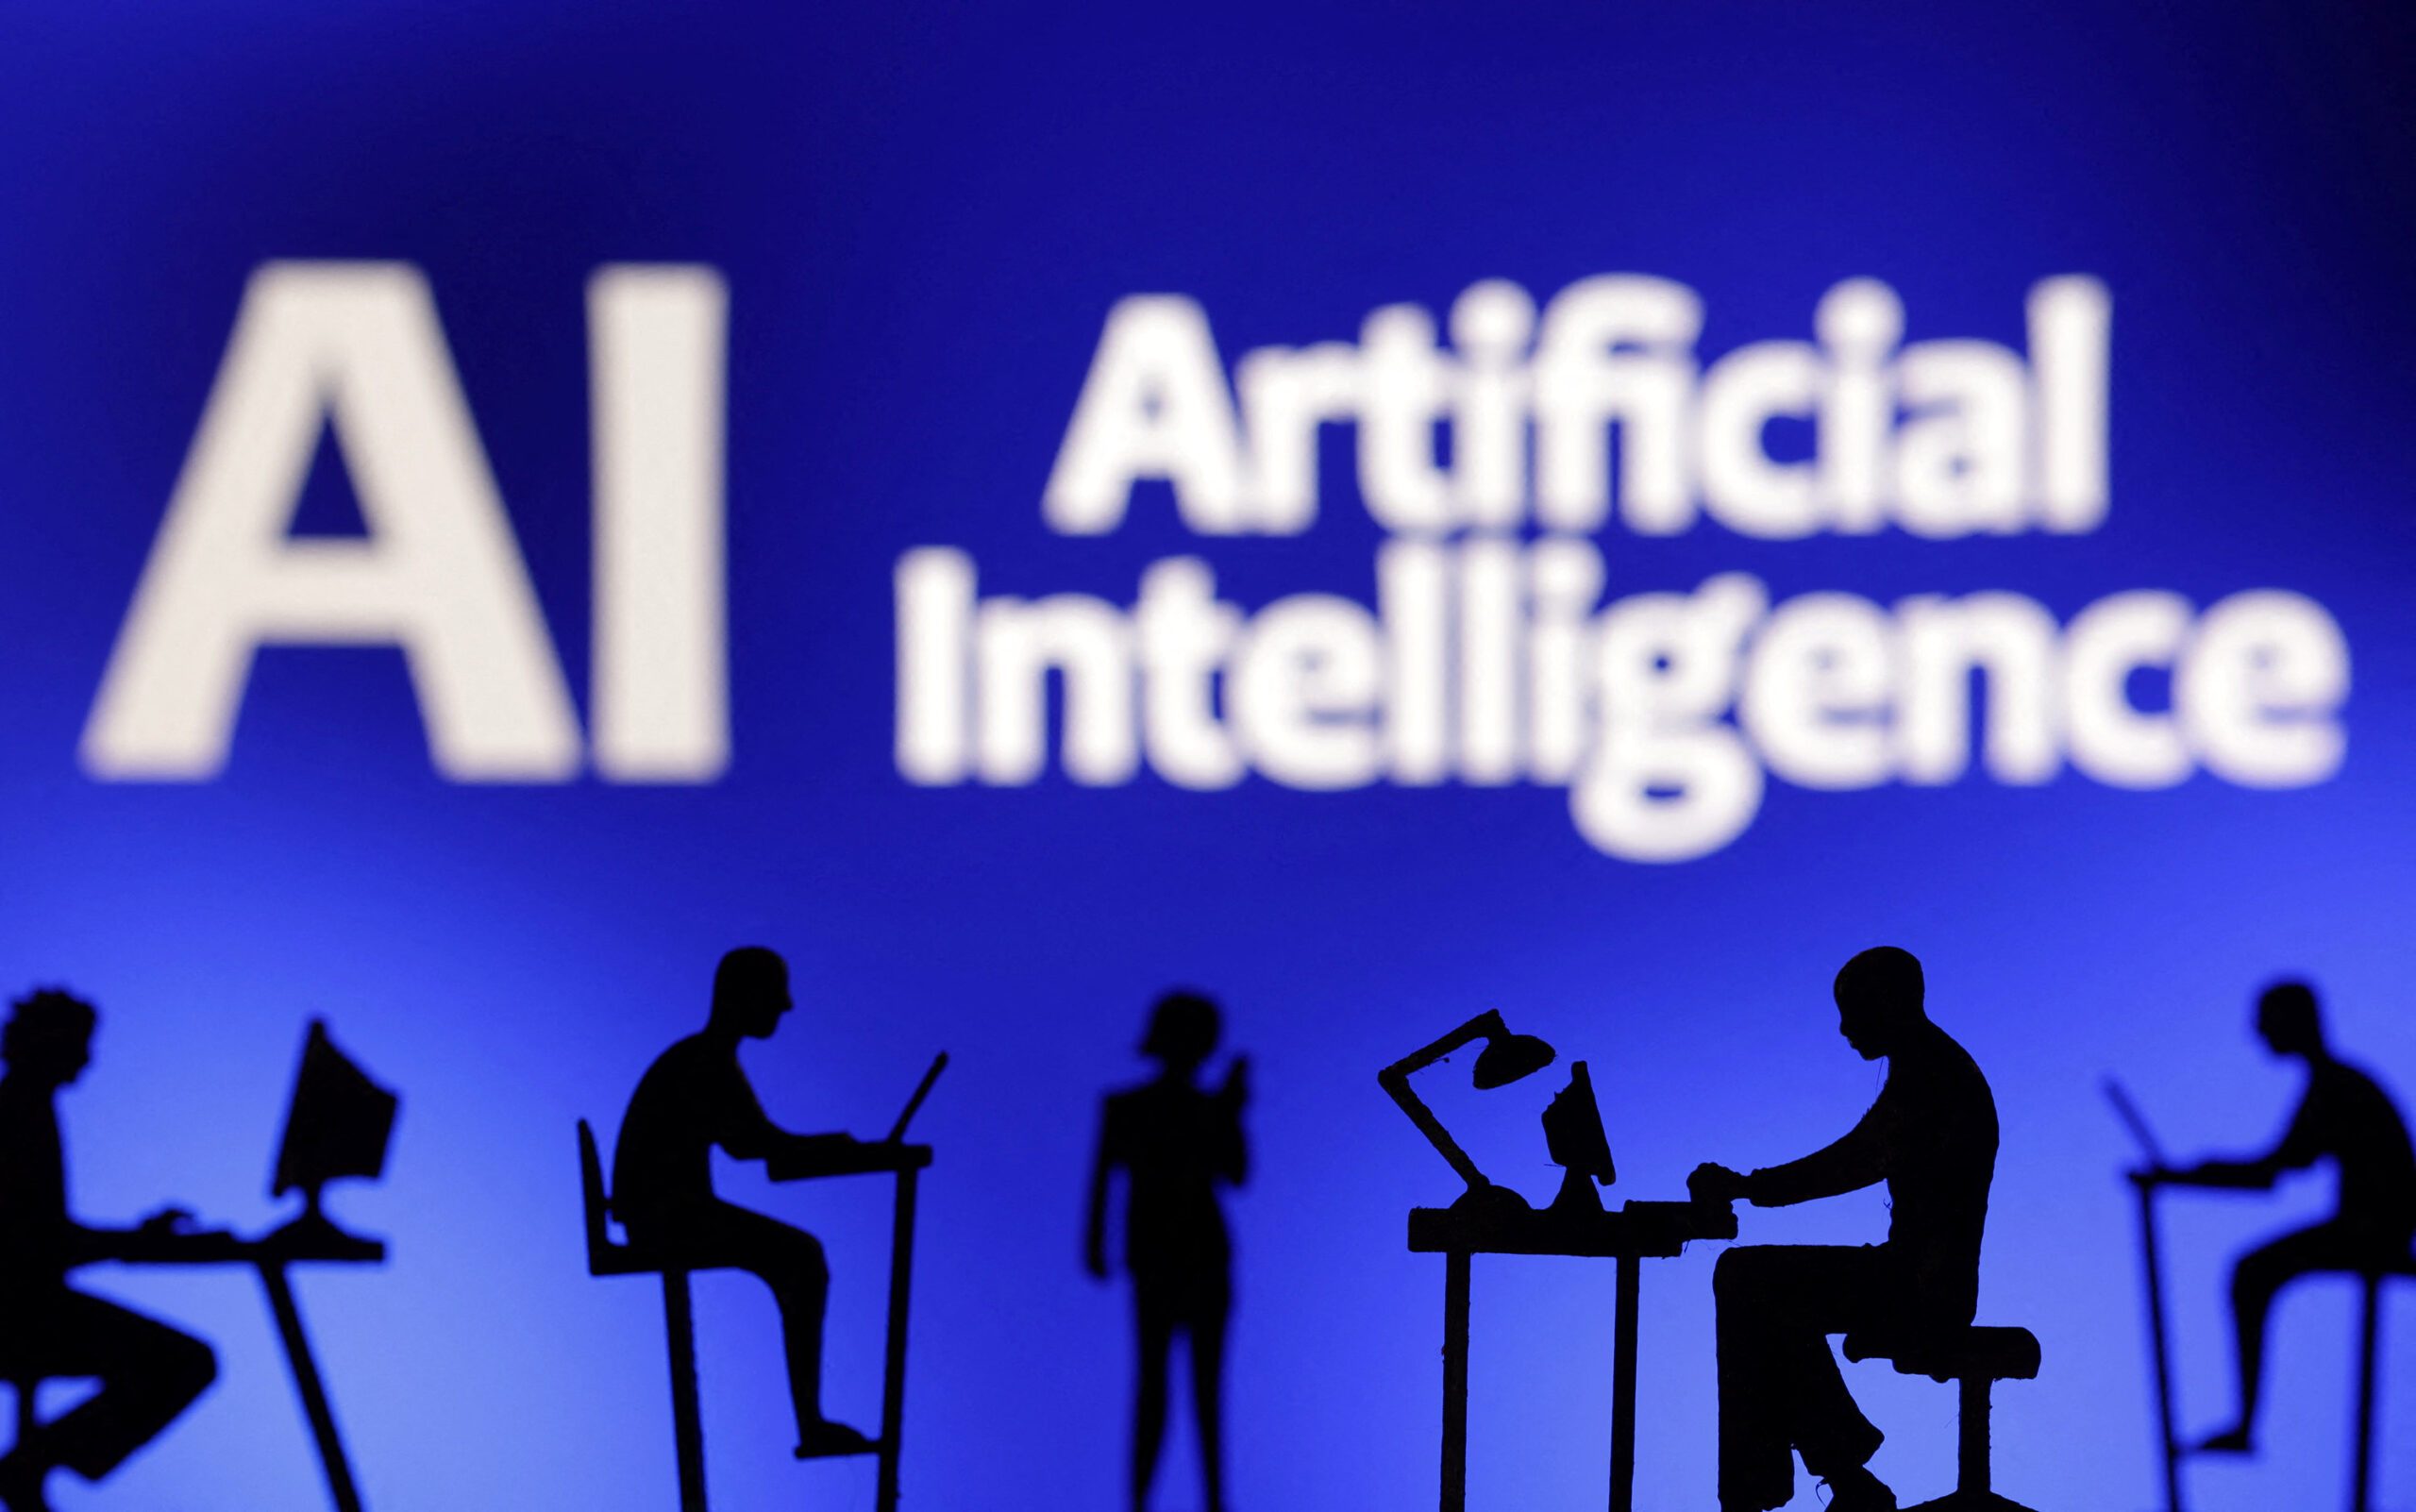 India Digest: Reliance-backed consortium plans to launch AI model; Uber tests store pickup feature in India